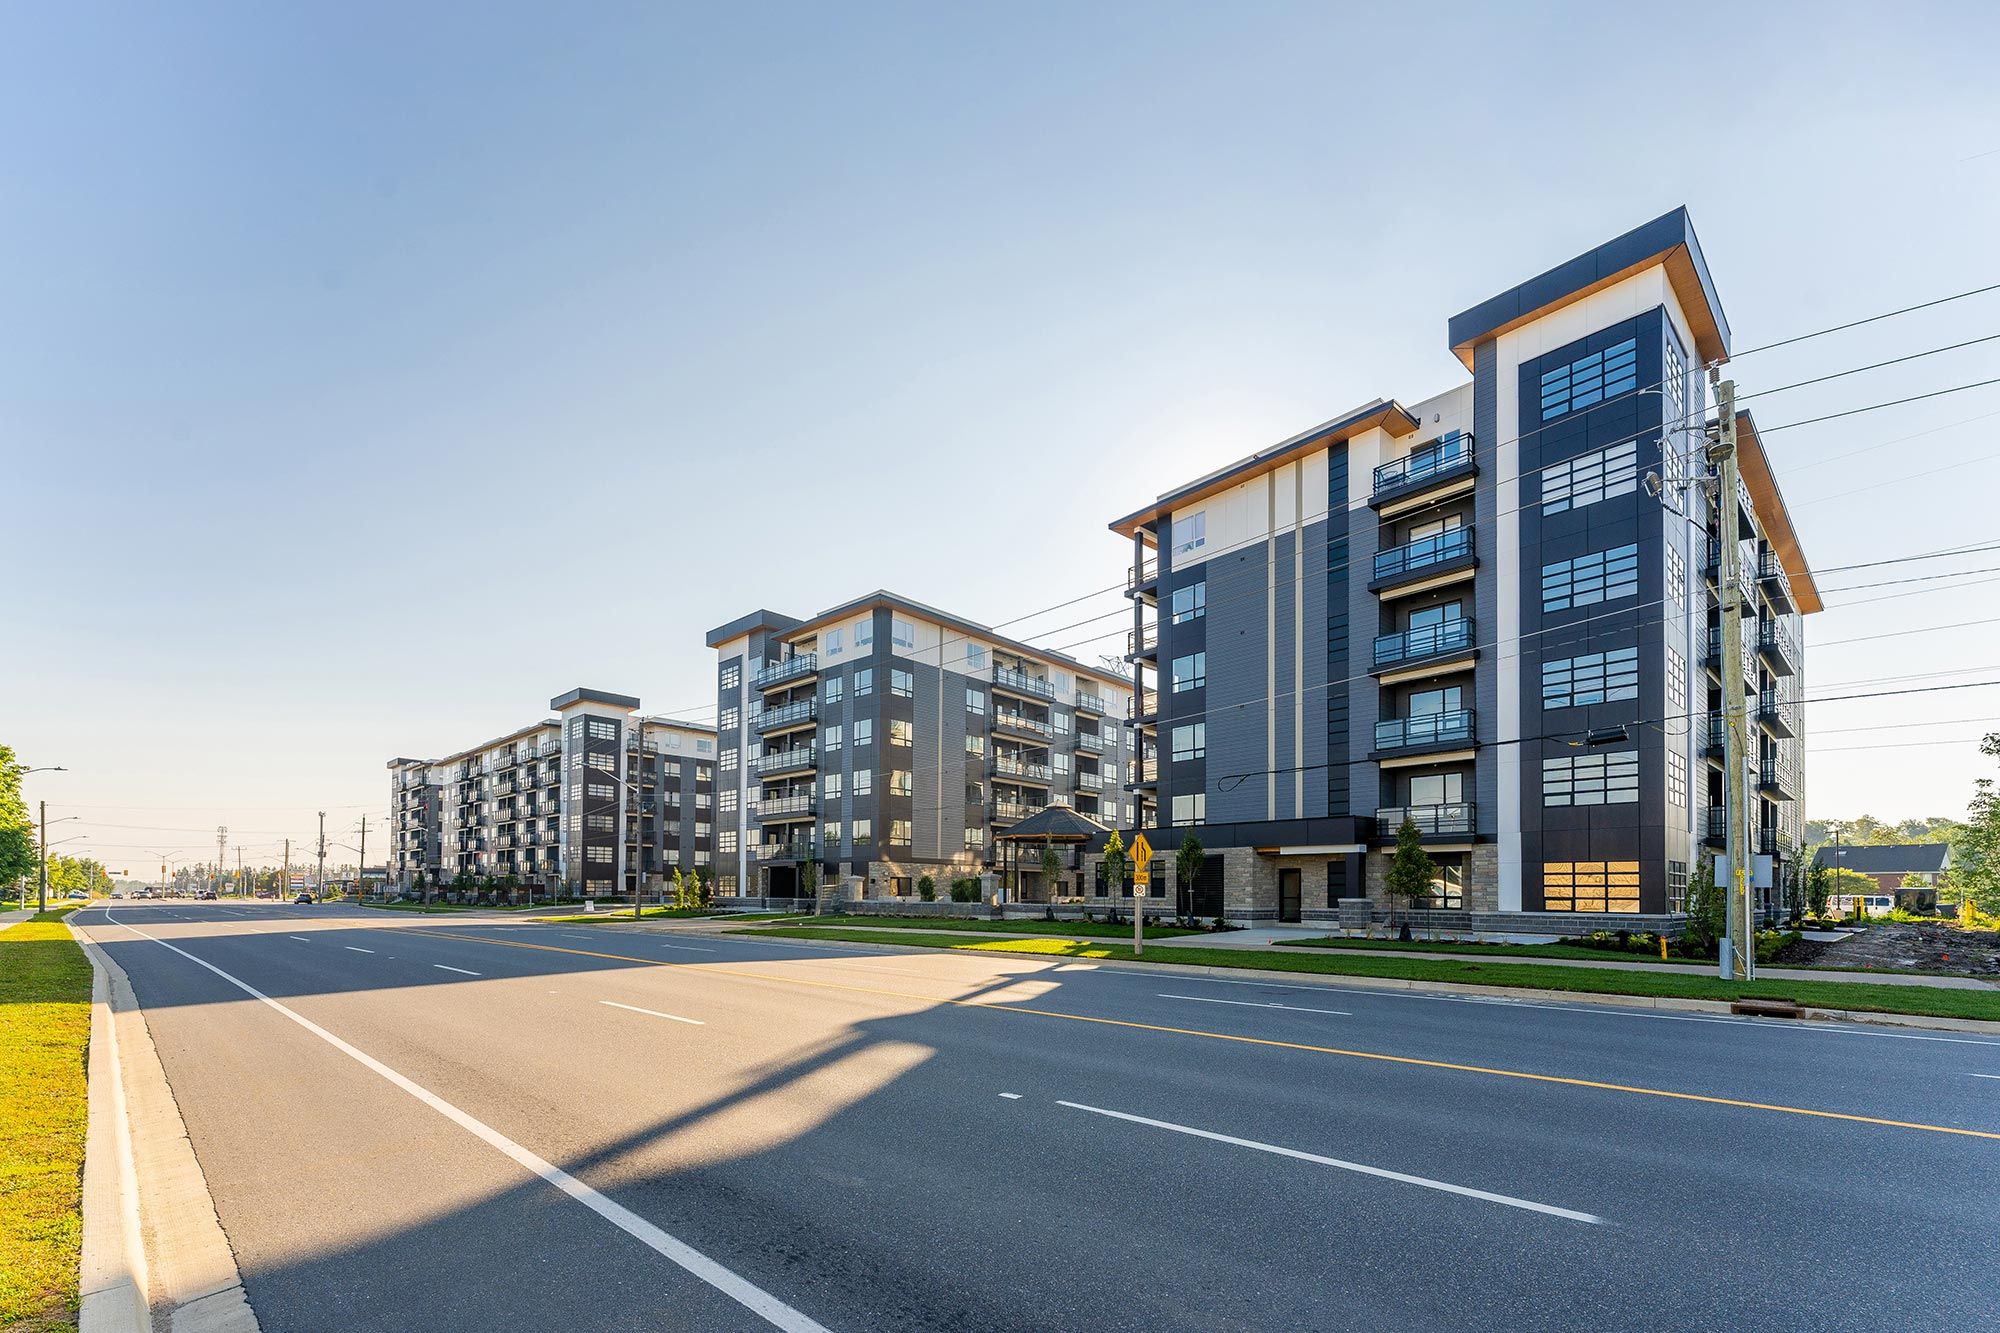 Image of completed Blackstone Condo buildings on Northfield Drive.